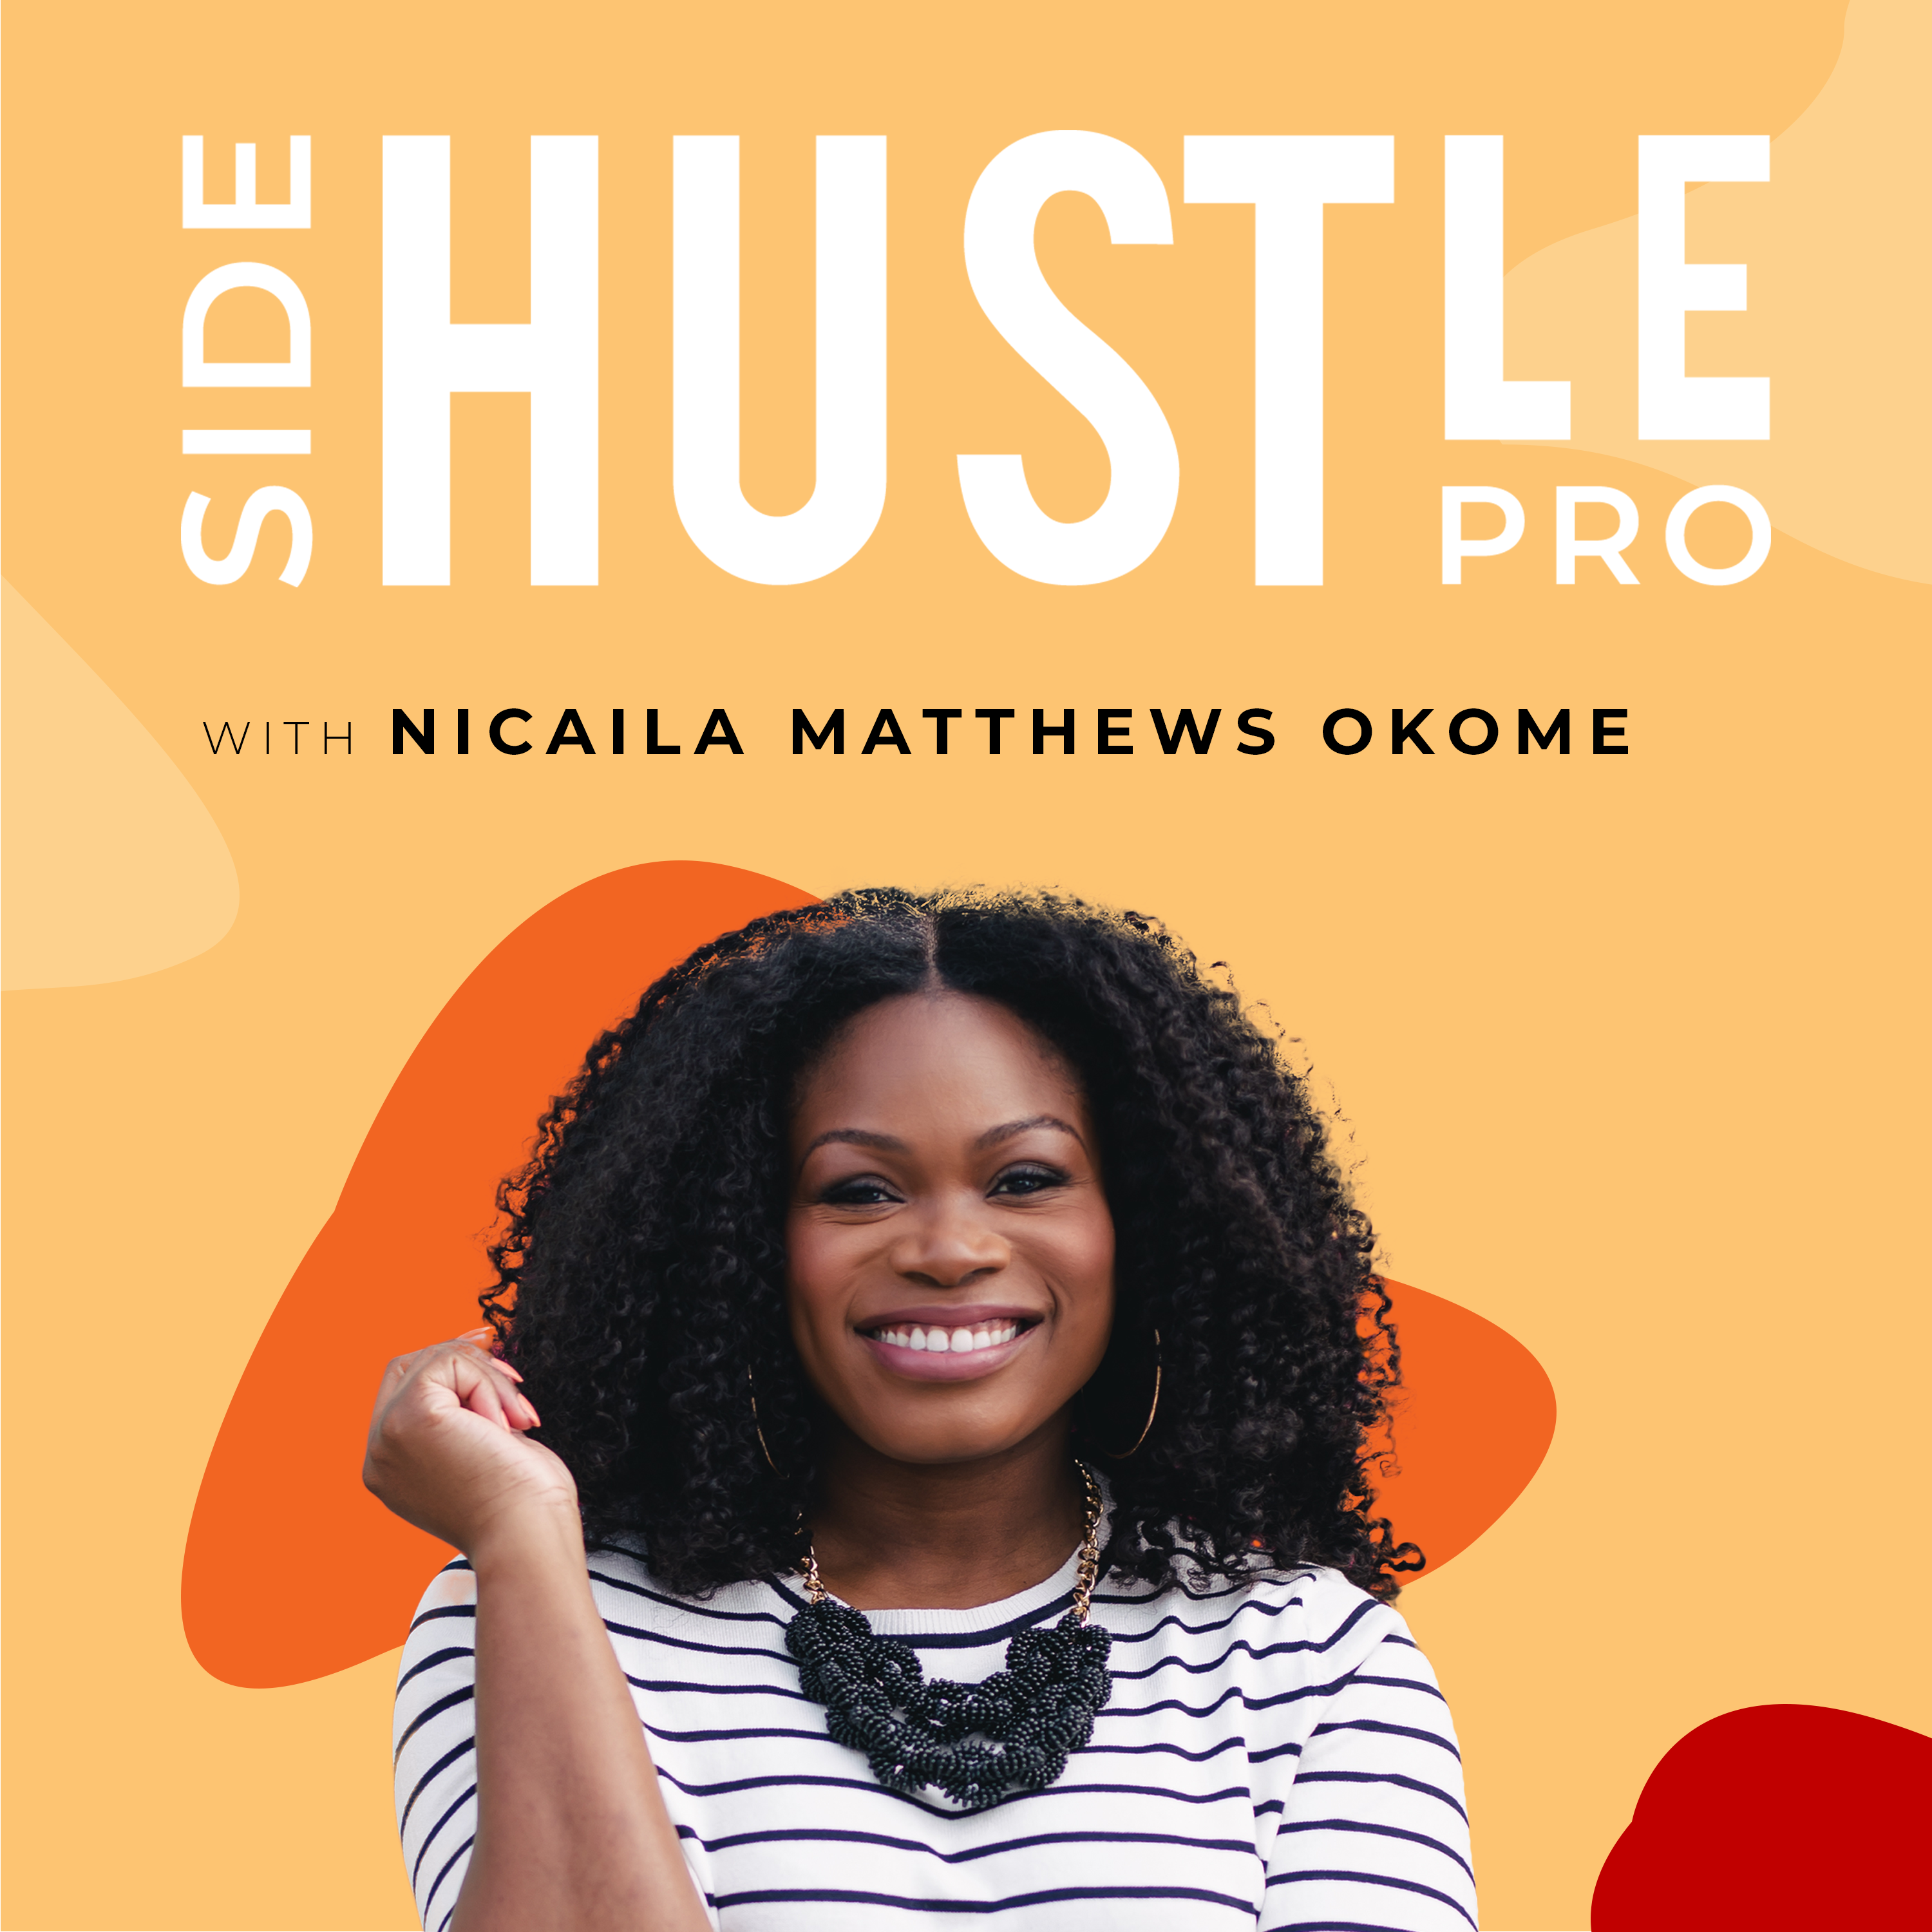 226: How The Founder Of Grace Eleyae Went From Selling Products On Etsy To Selling One Of Oprah’s Favorite Things